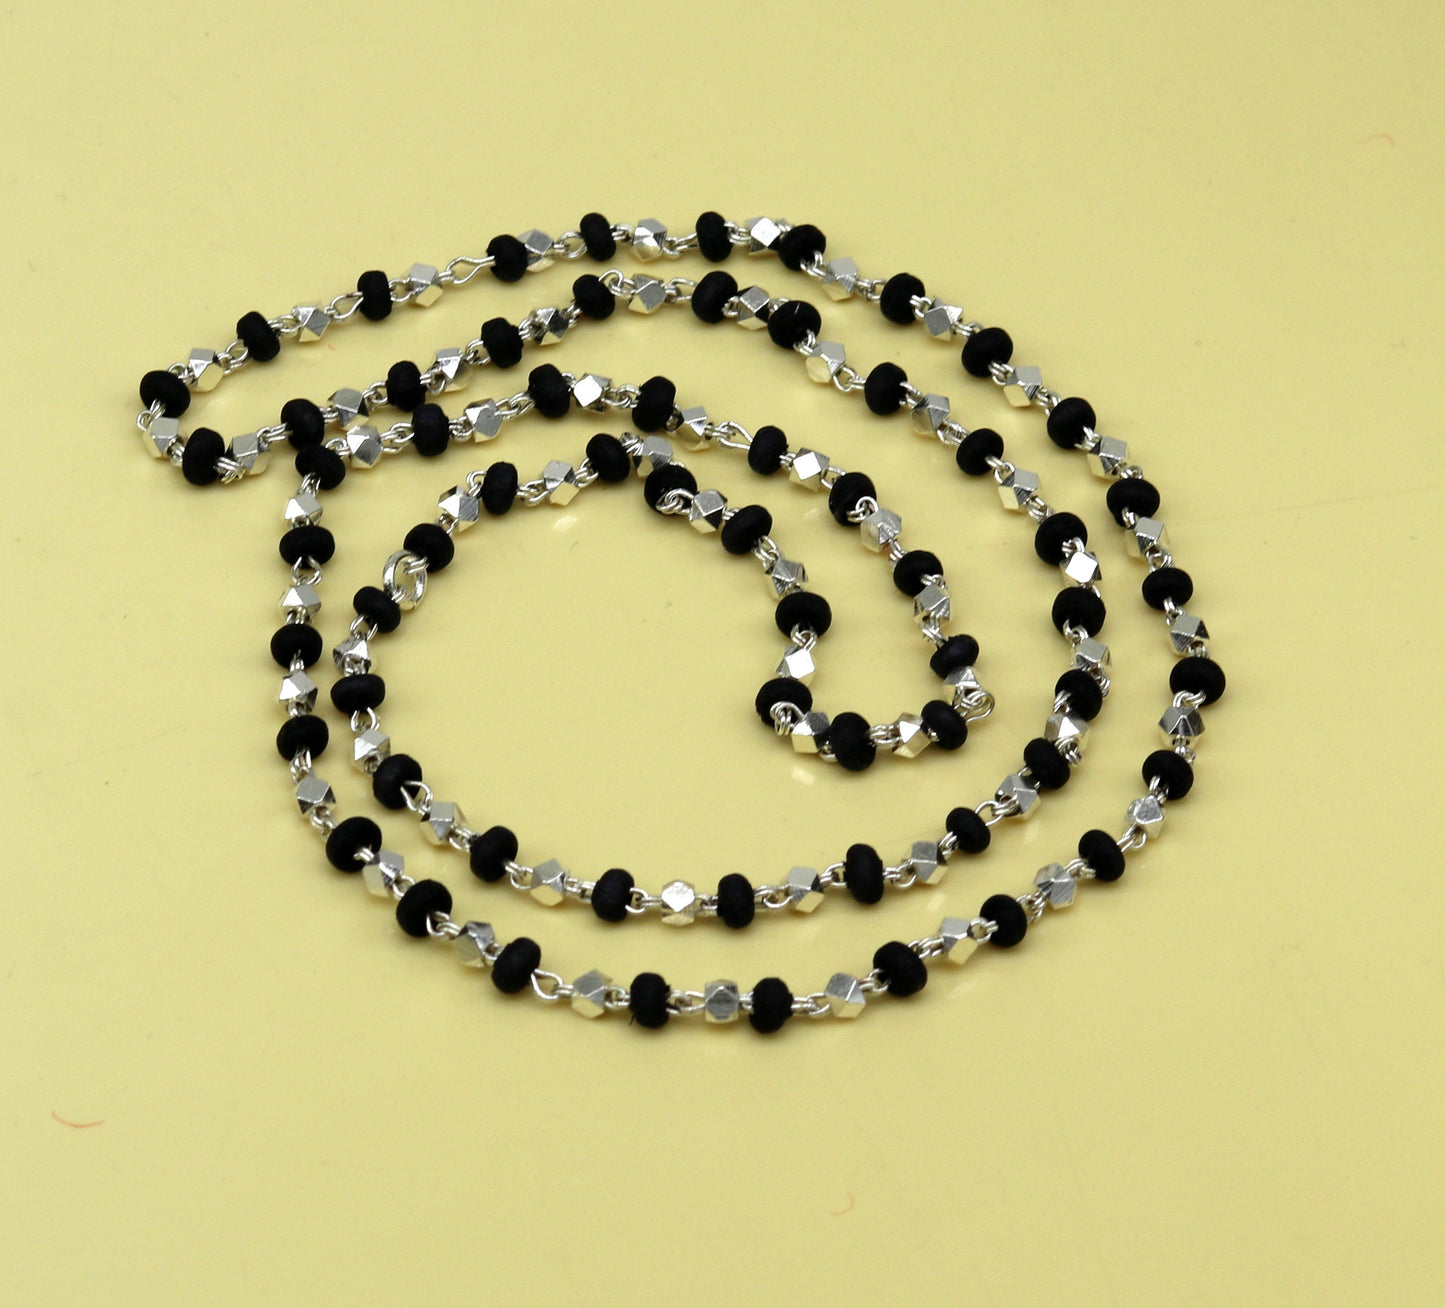 24" Sterling silver handmade wooden beads black basil rosary silver chain necklace unisex jewelry , tulsi mala customized necklace ch82 - TRIBAL ORNAMENTS